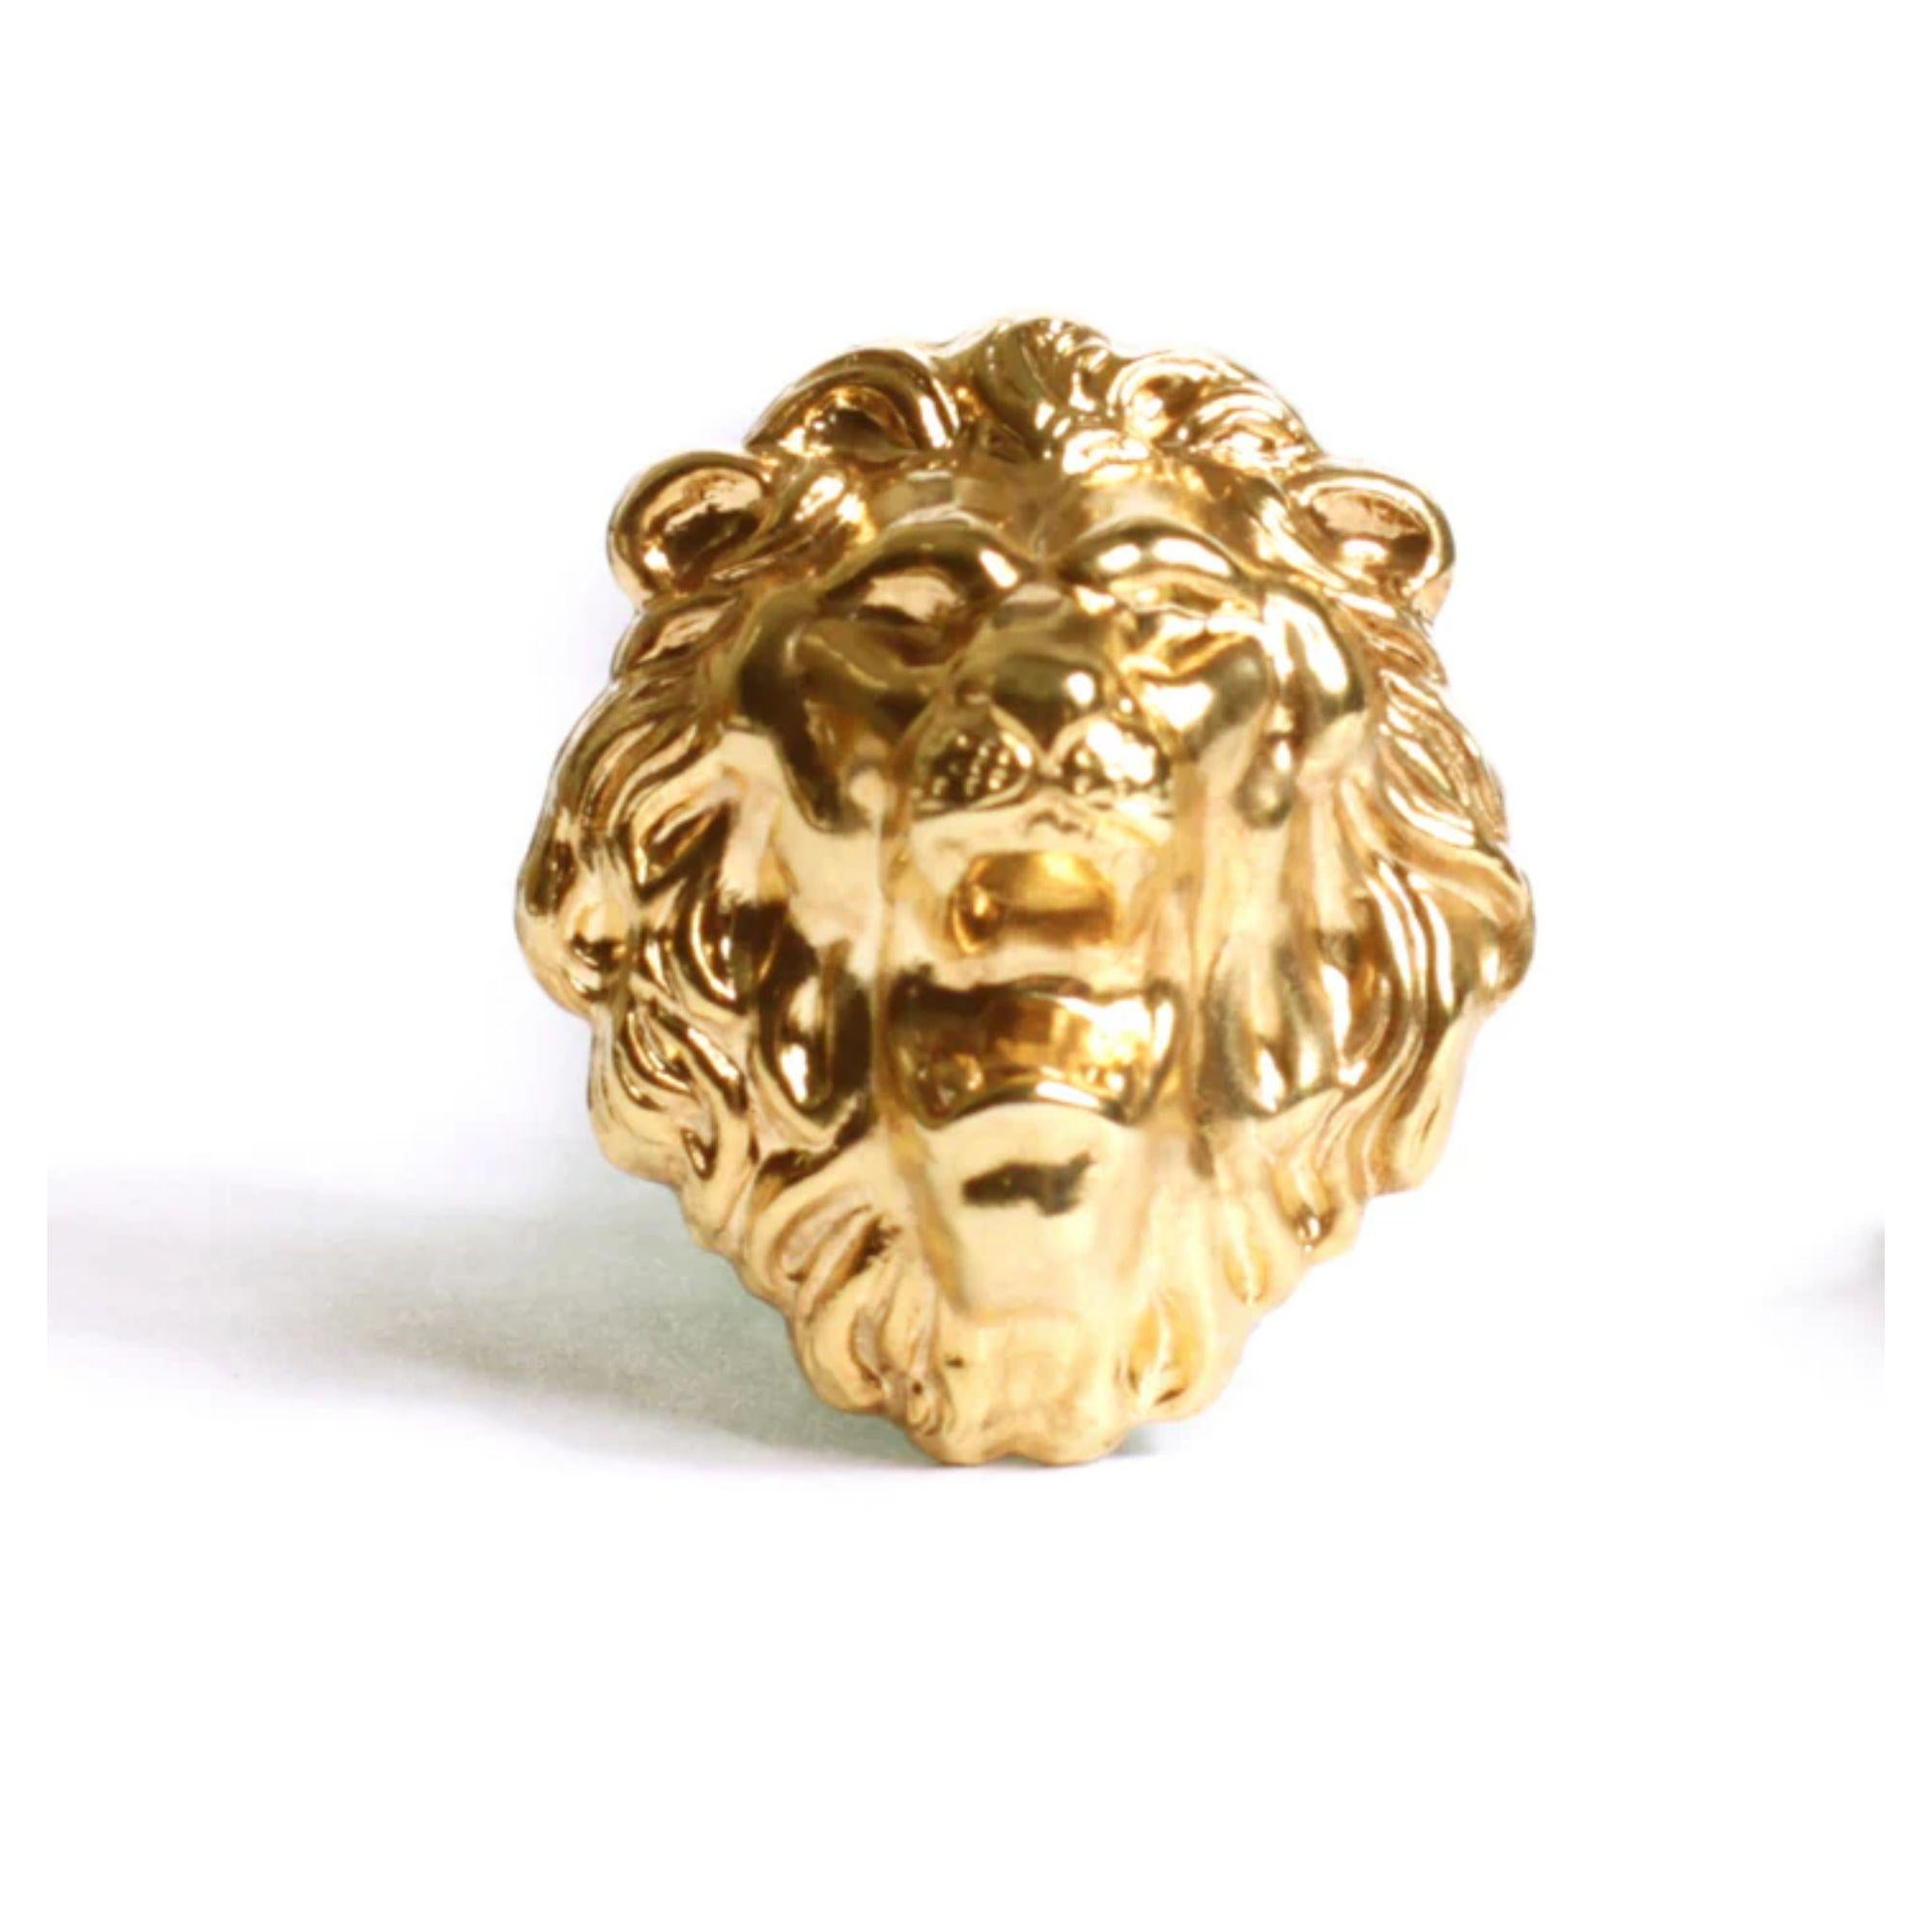 The King of the jungle will empower you and is a mix of masculine and feminine. A baroque ring with a lion roaring. Great for a woman or man’s pinky ring. Made in America. Plated in 24k yellow gold on Brass.

Additional Information:
Material: 24K